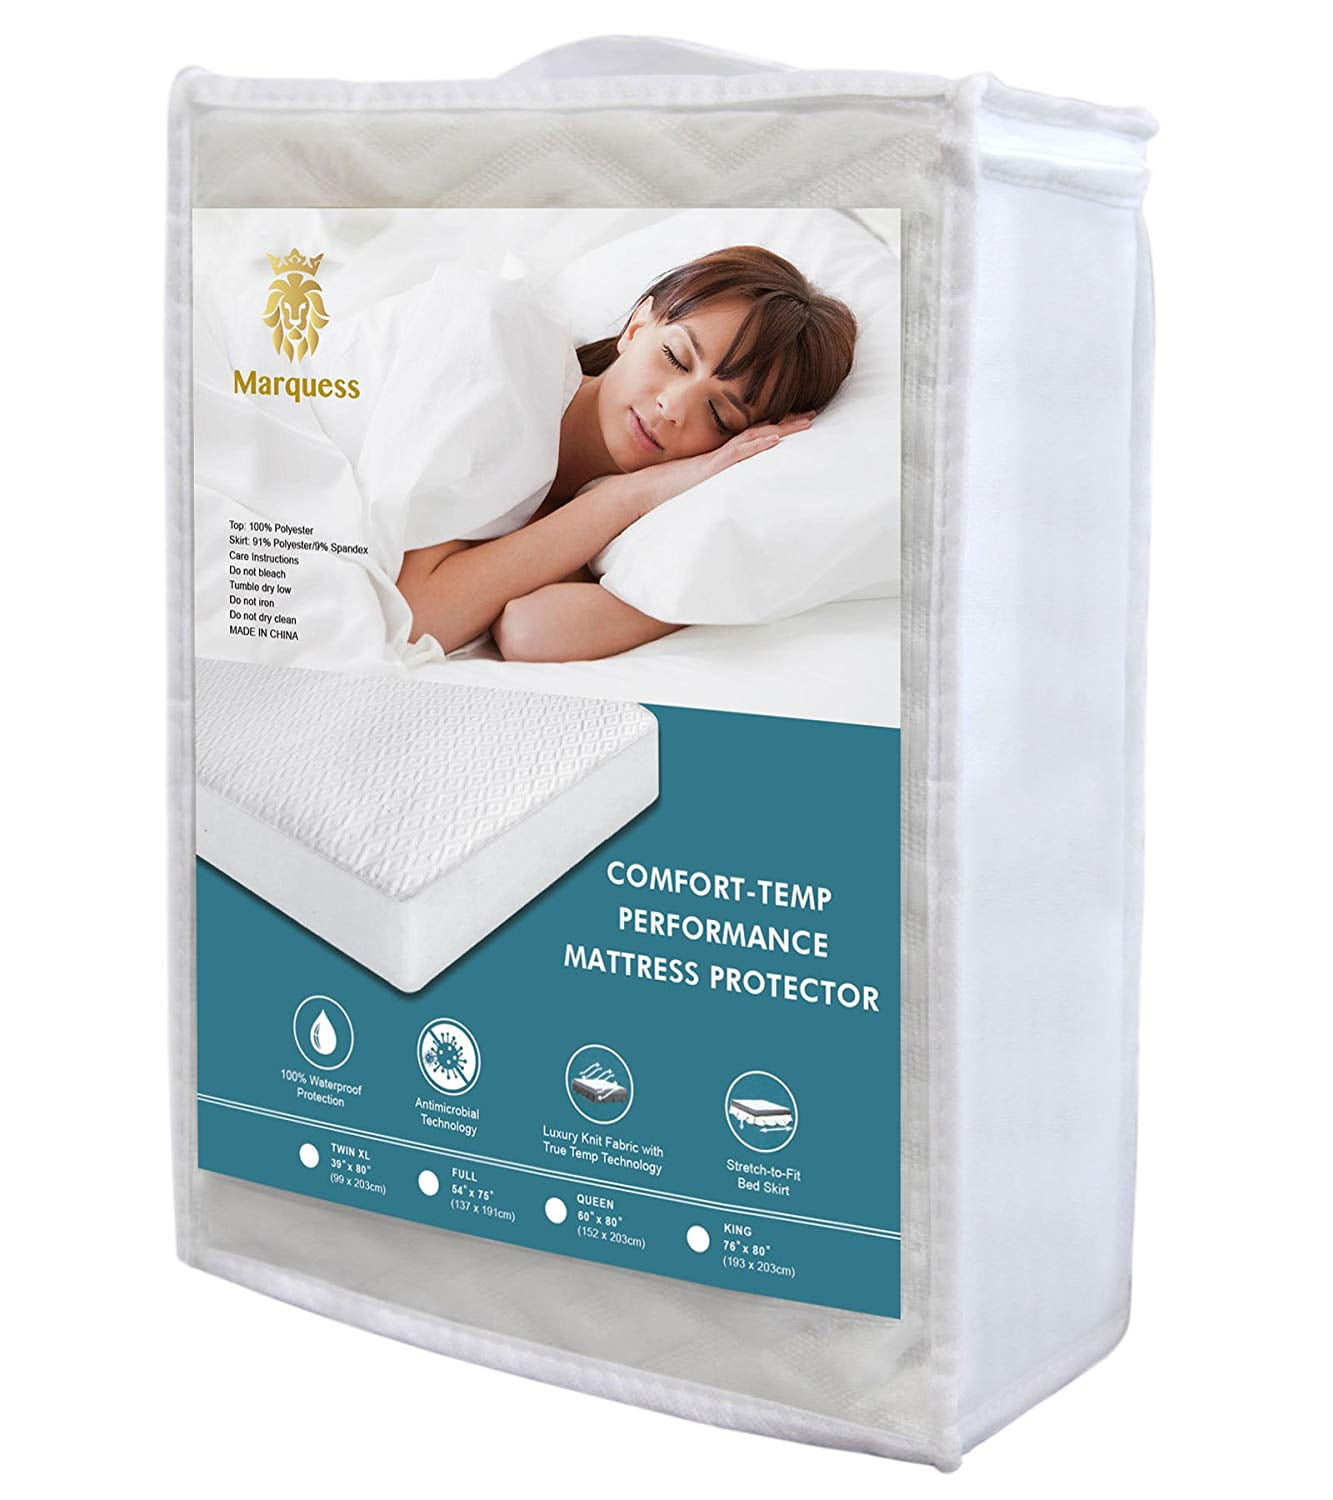 Twin XL, Stretches 9 to 15 Depth RestComfort Zippered Mattress Protector and Encasement Dust Mite and Bed Bug Proof with Cotton Terry Top Hypoallergenic and Water Resistant